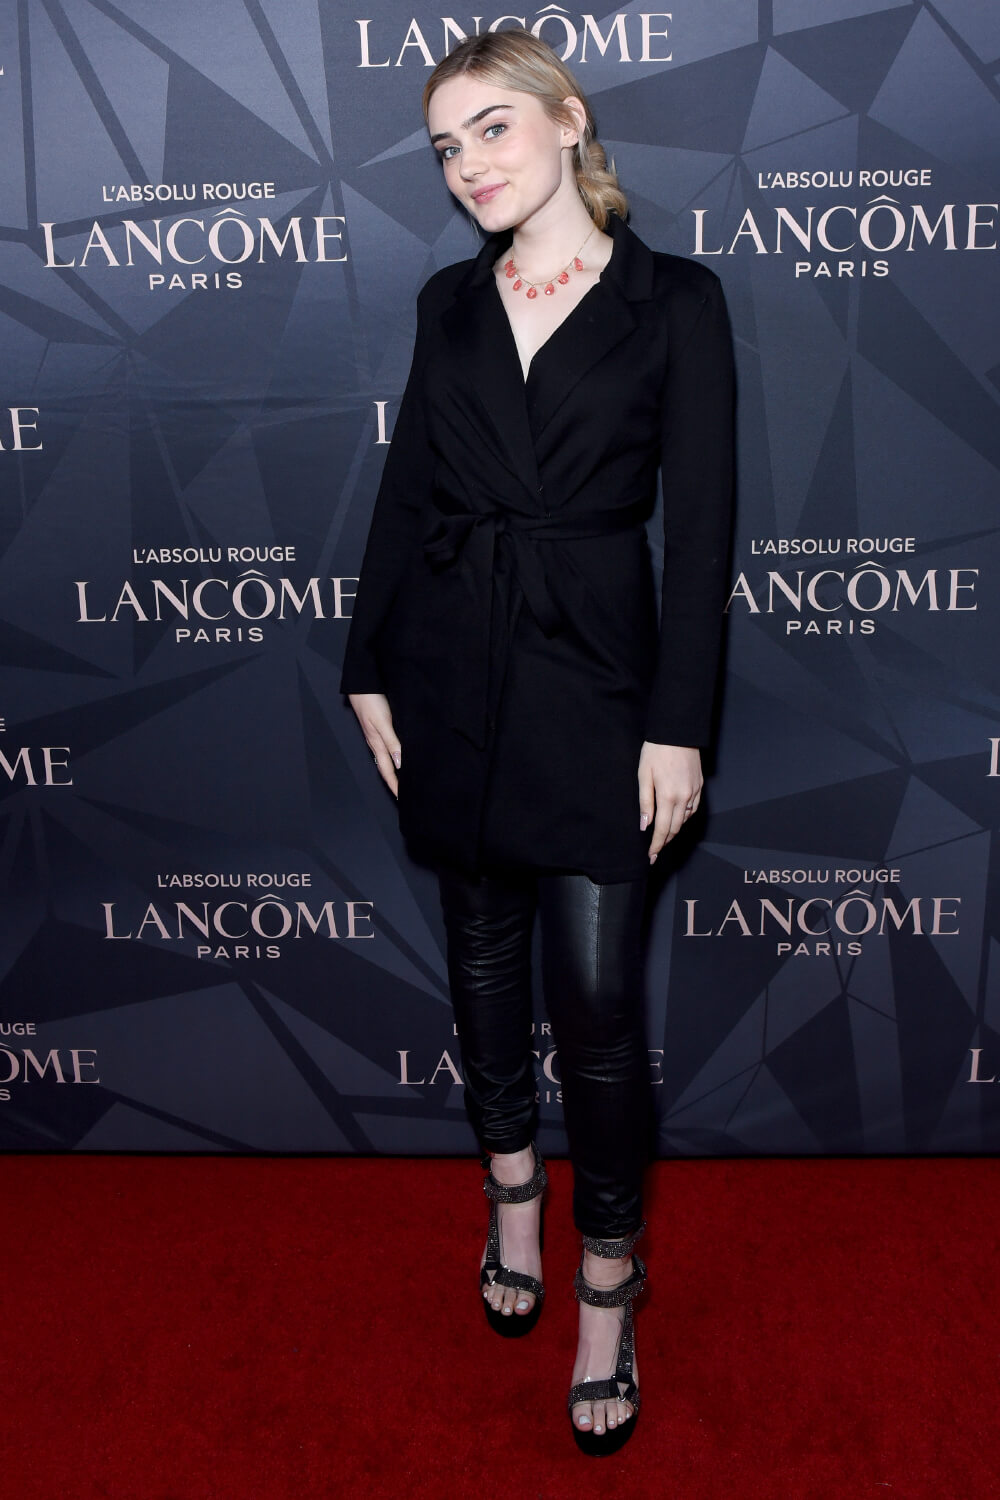 Meg Donnelly attends Lancome x Vogue L’Absolu Ruby Holiday Event